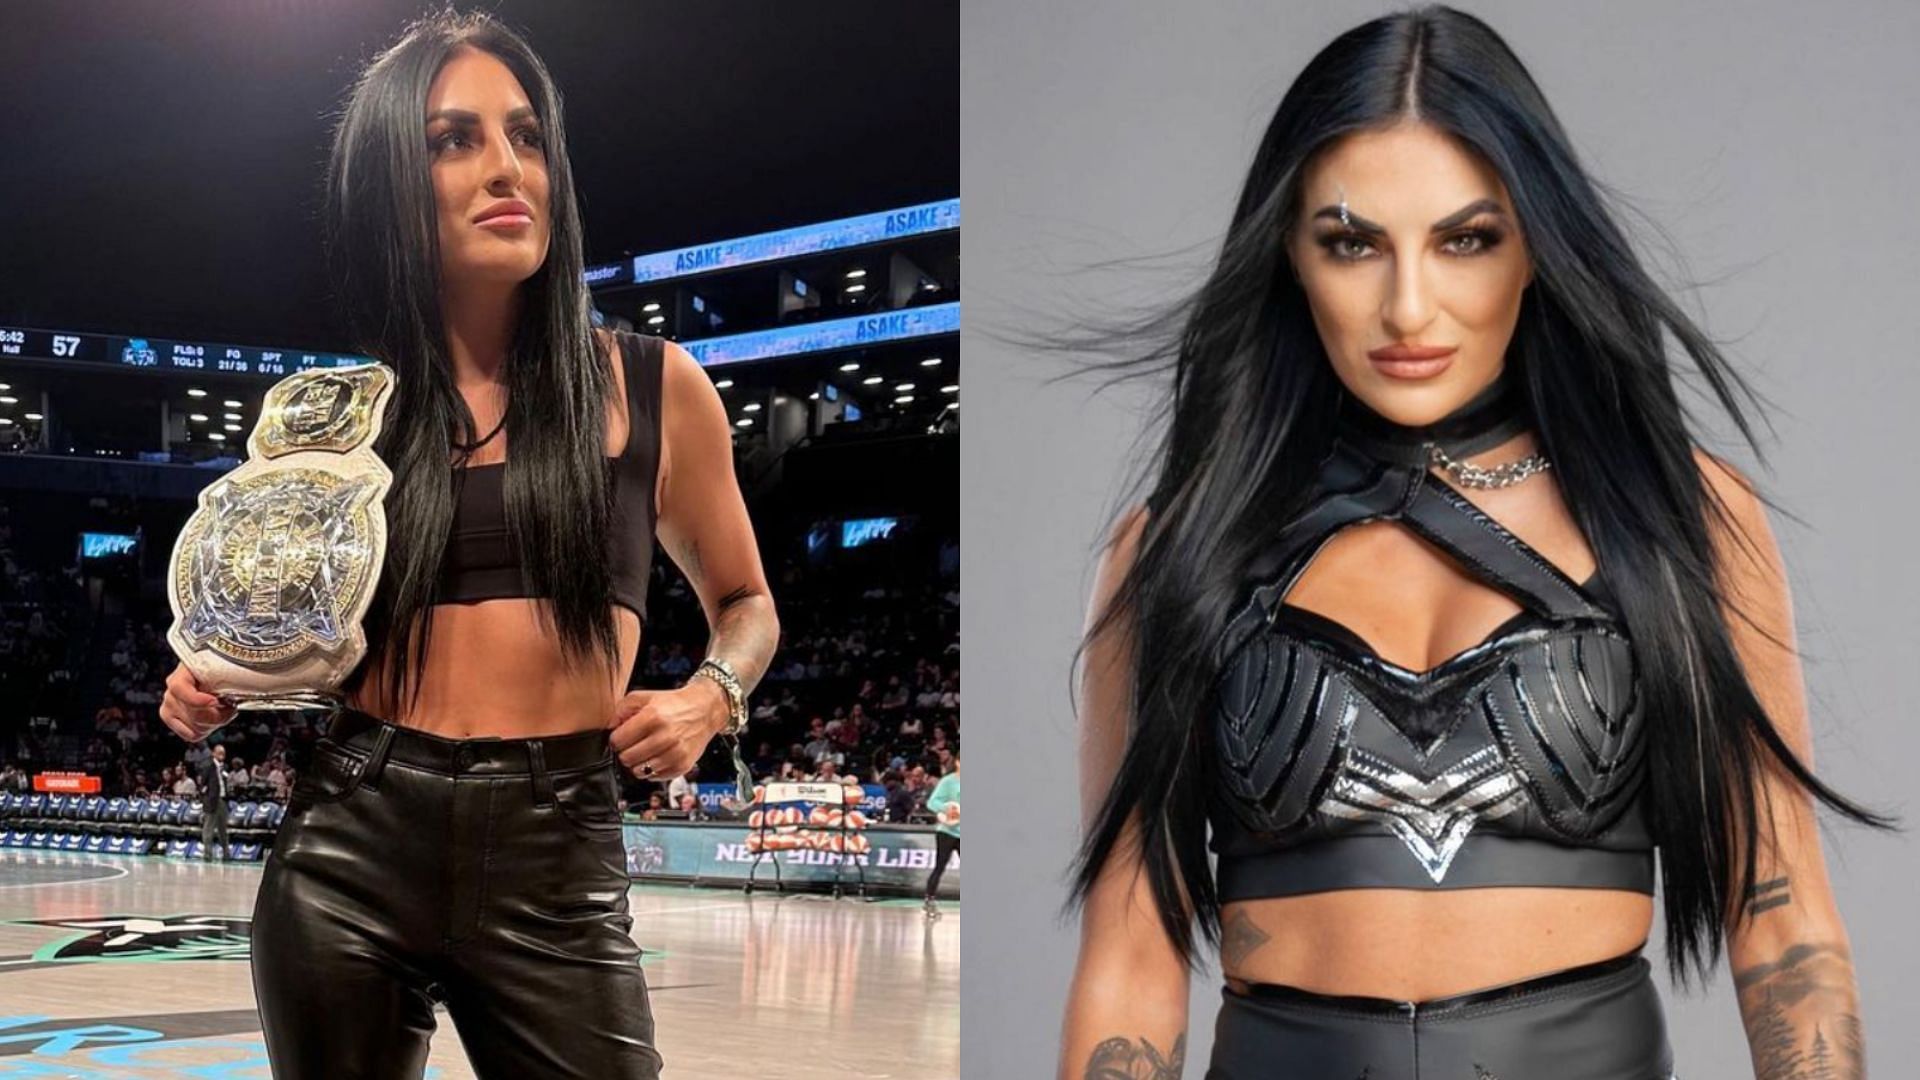 Sonya Deville is currently one half of the Women